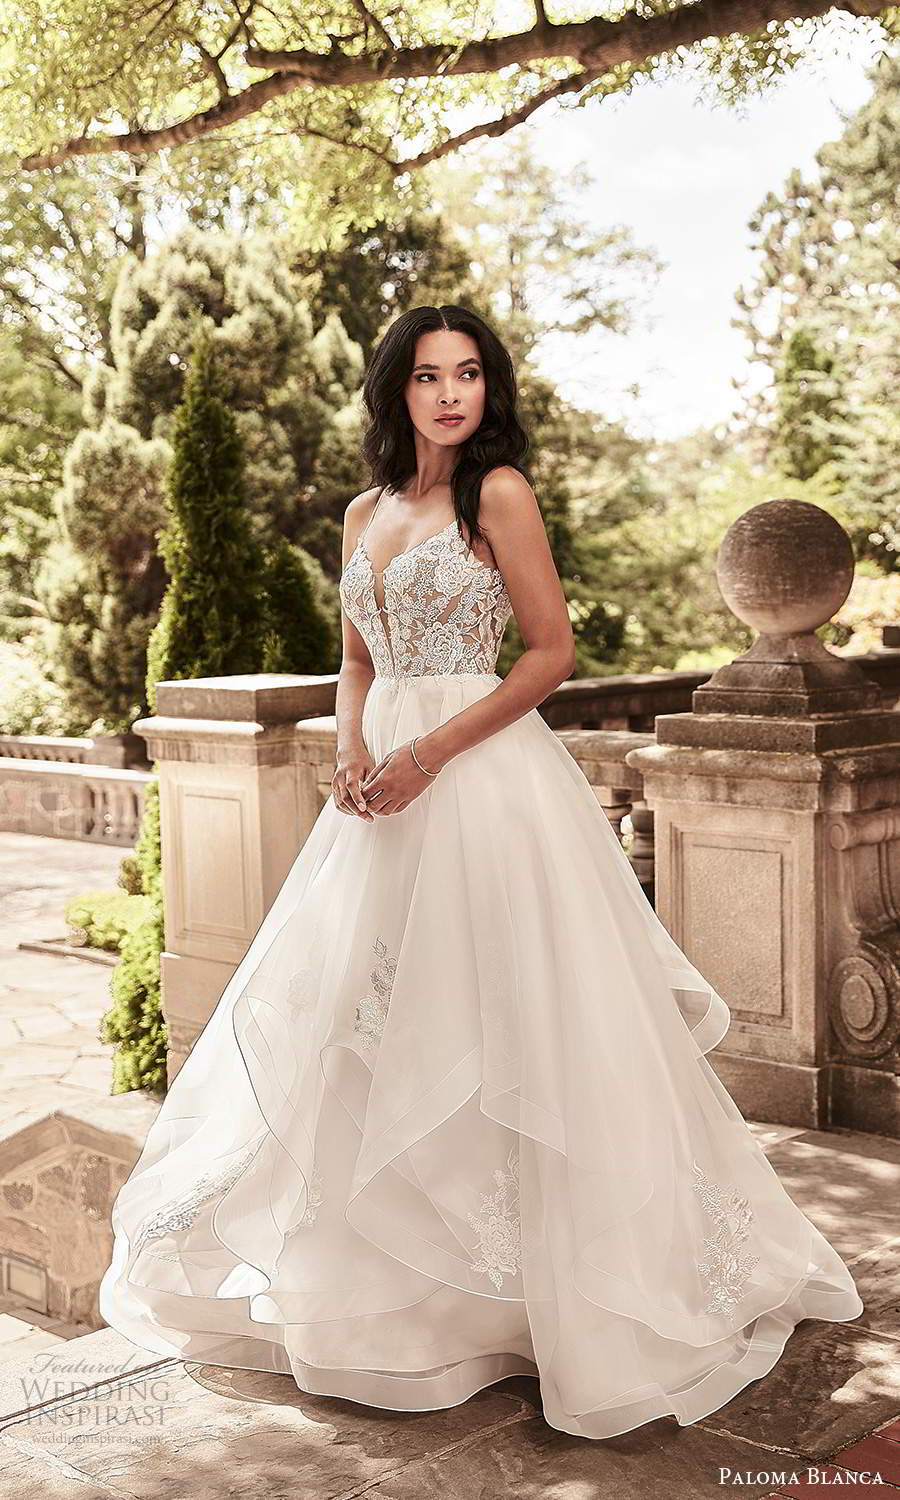 paloma blanca spring 2021 bridal sleeveless thin straps plunging v neckline embellished lace bodice a line ball gown wedding dress tiered skirt chapel train (8) mv